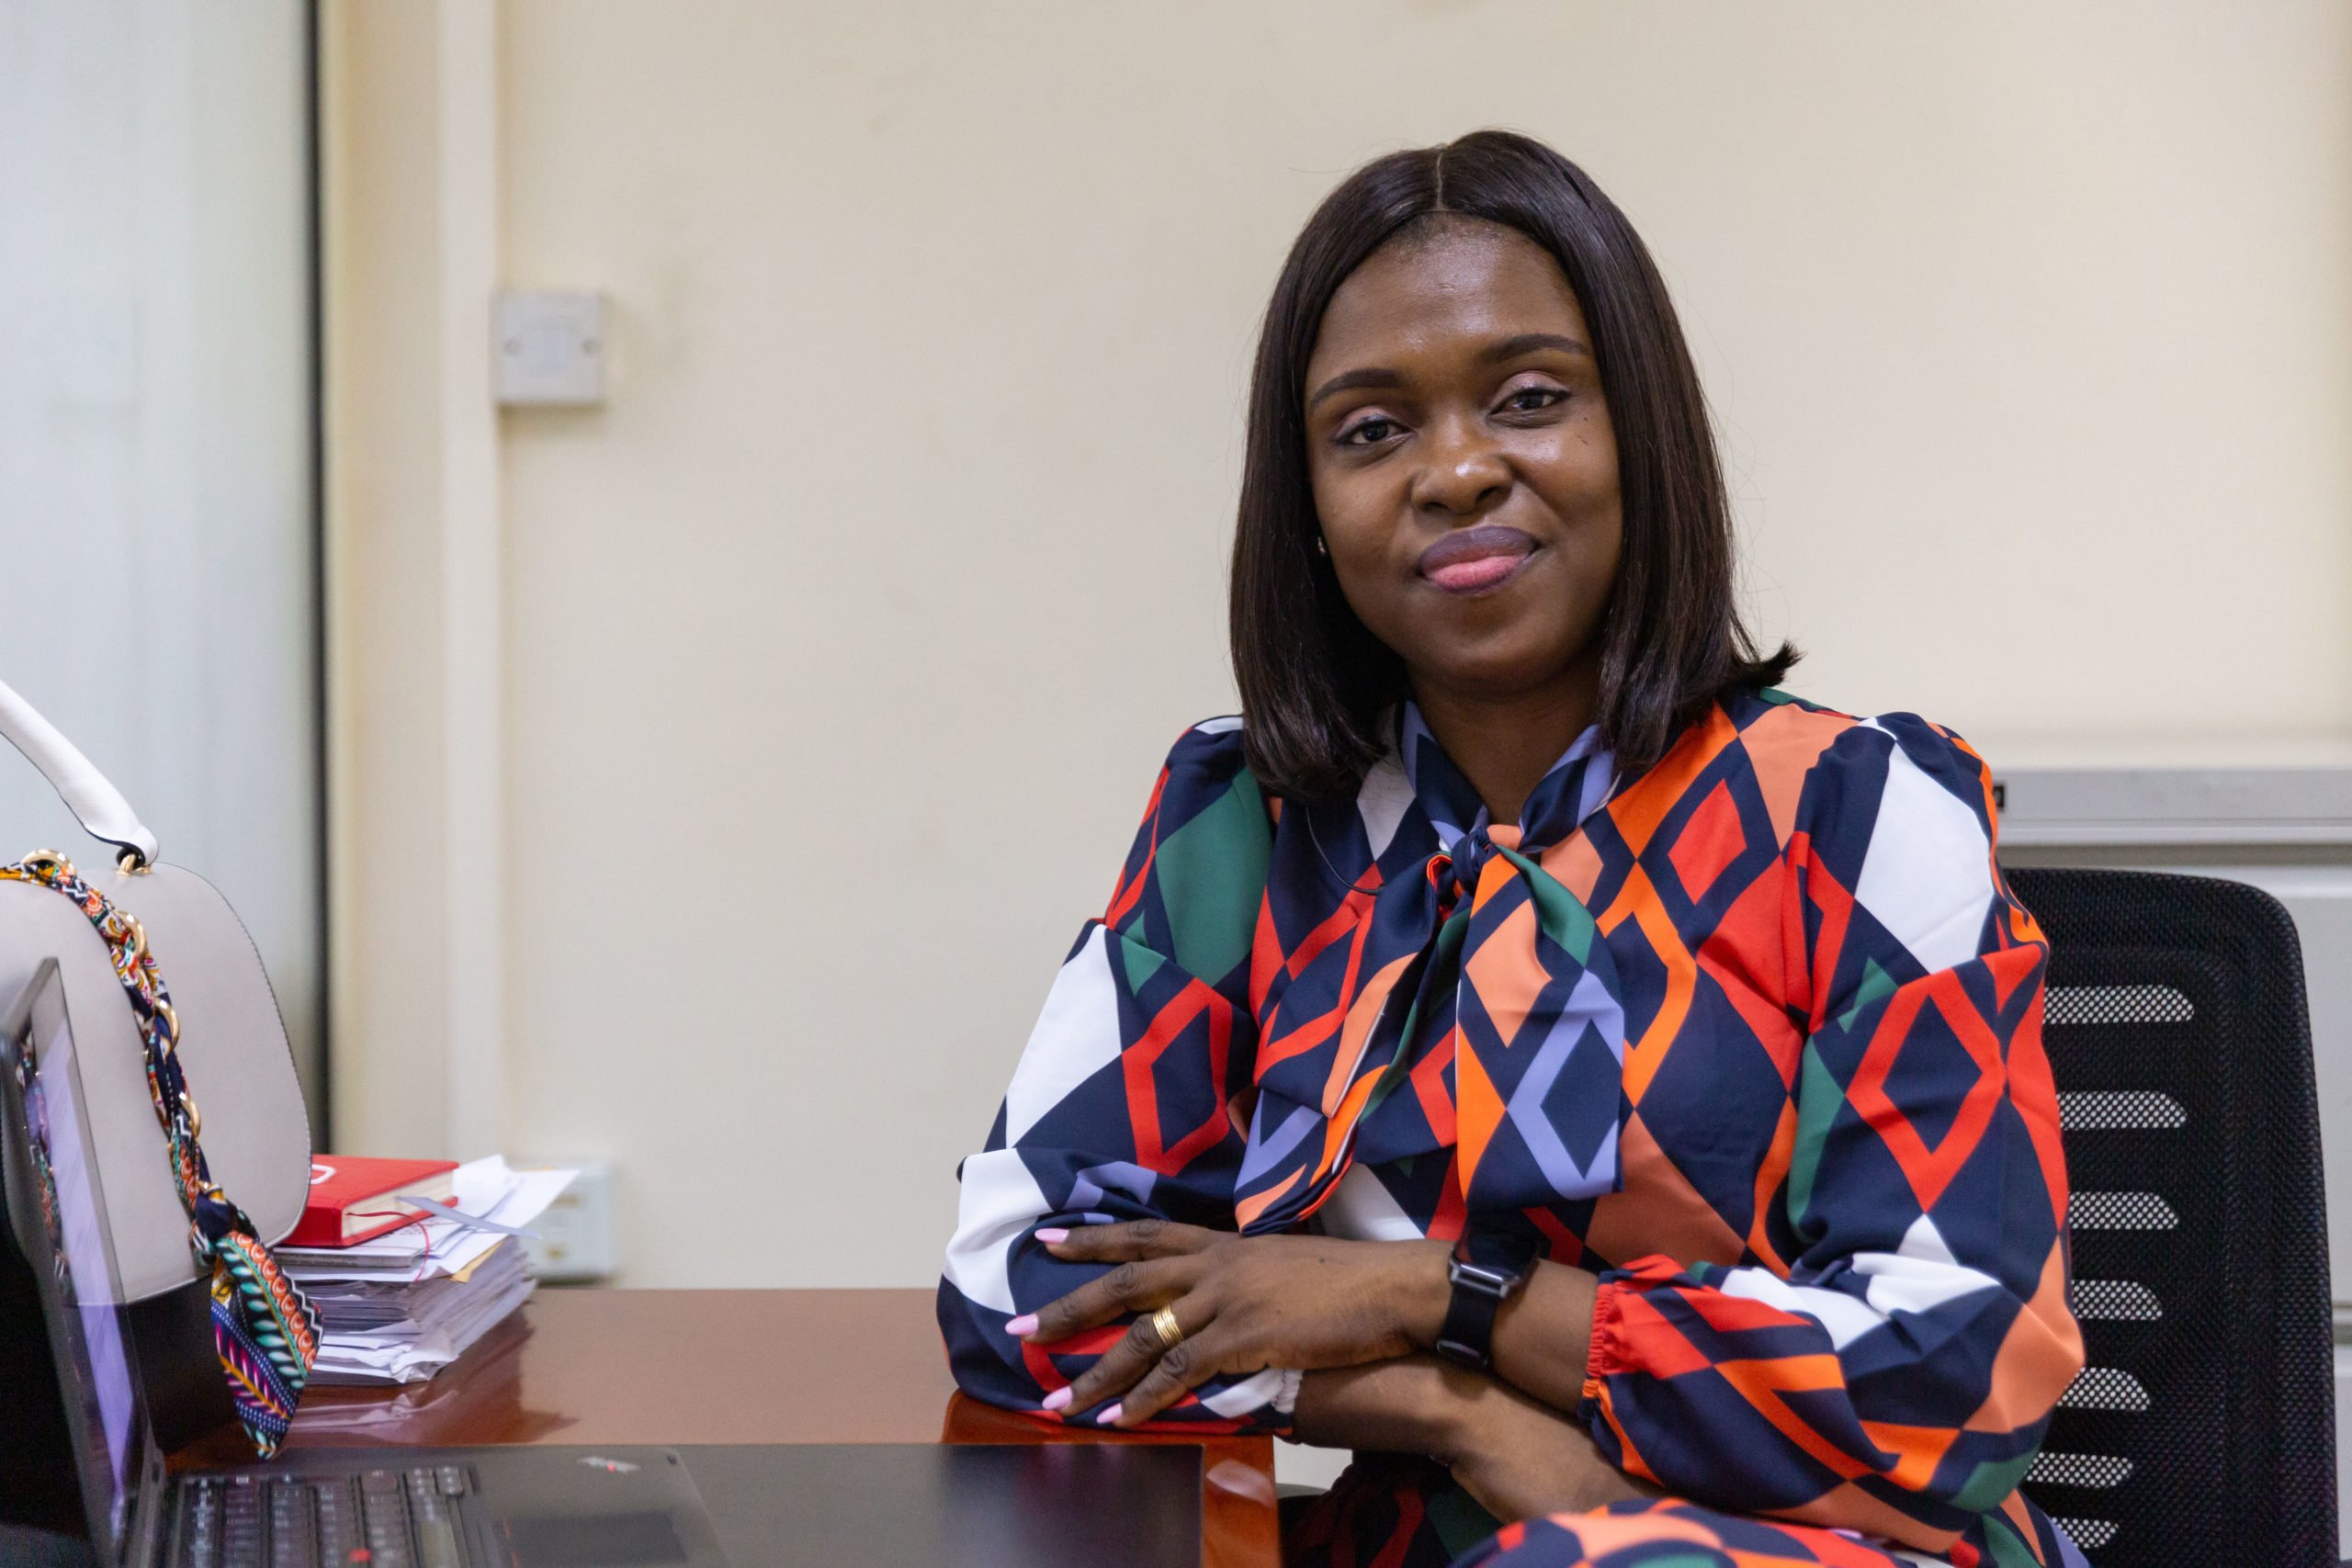 Atinuke Badejo poses for a portrait at her office in Yaba, Lagos Nigeria on 2nd March 2021. The Cherie Blair Foundation for Women continues to support women entrepreneurs across many African countries through their blended learning programmes, like Road to Growth and HerVenture.